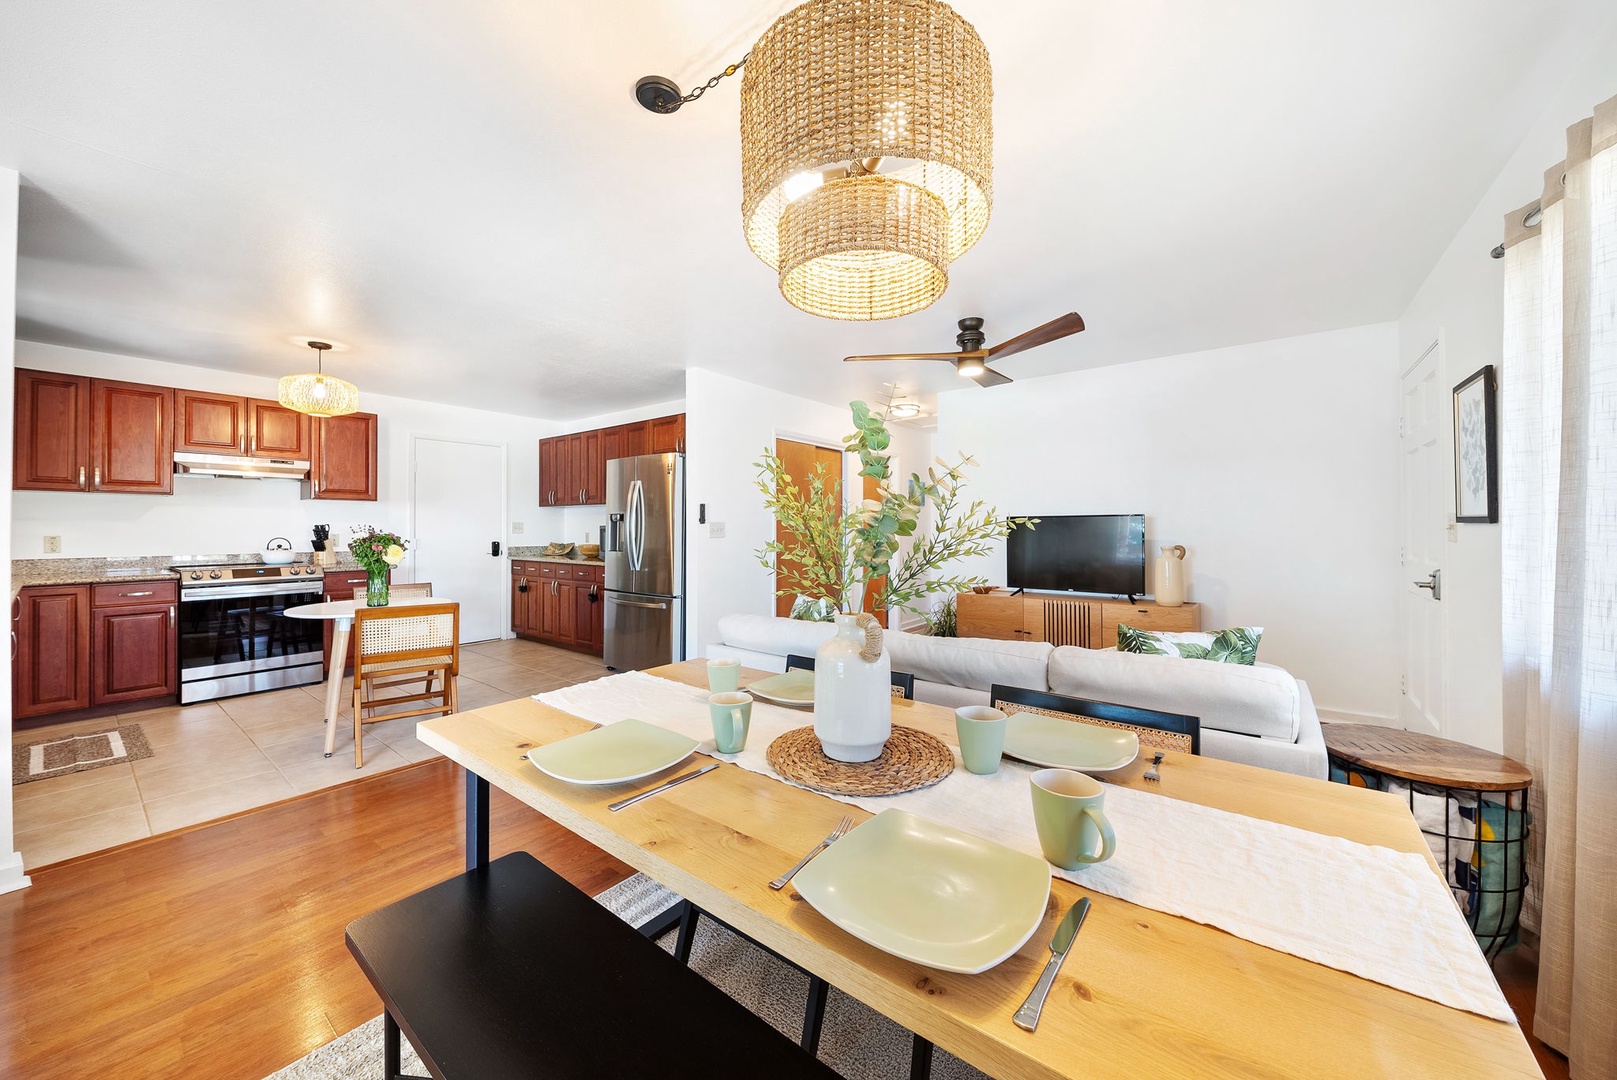 Haleiwa Vacation Rentals, Pikai Hale - The dining area overlooks the kitchen and living area